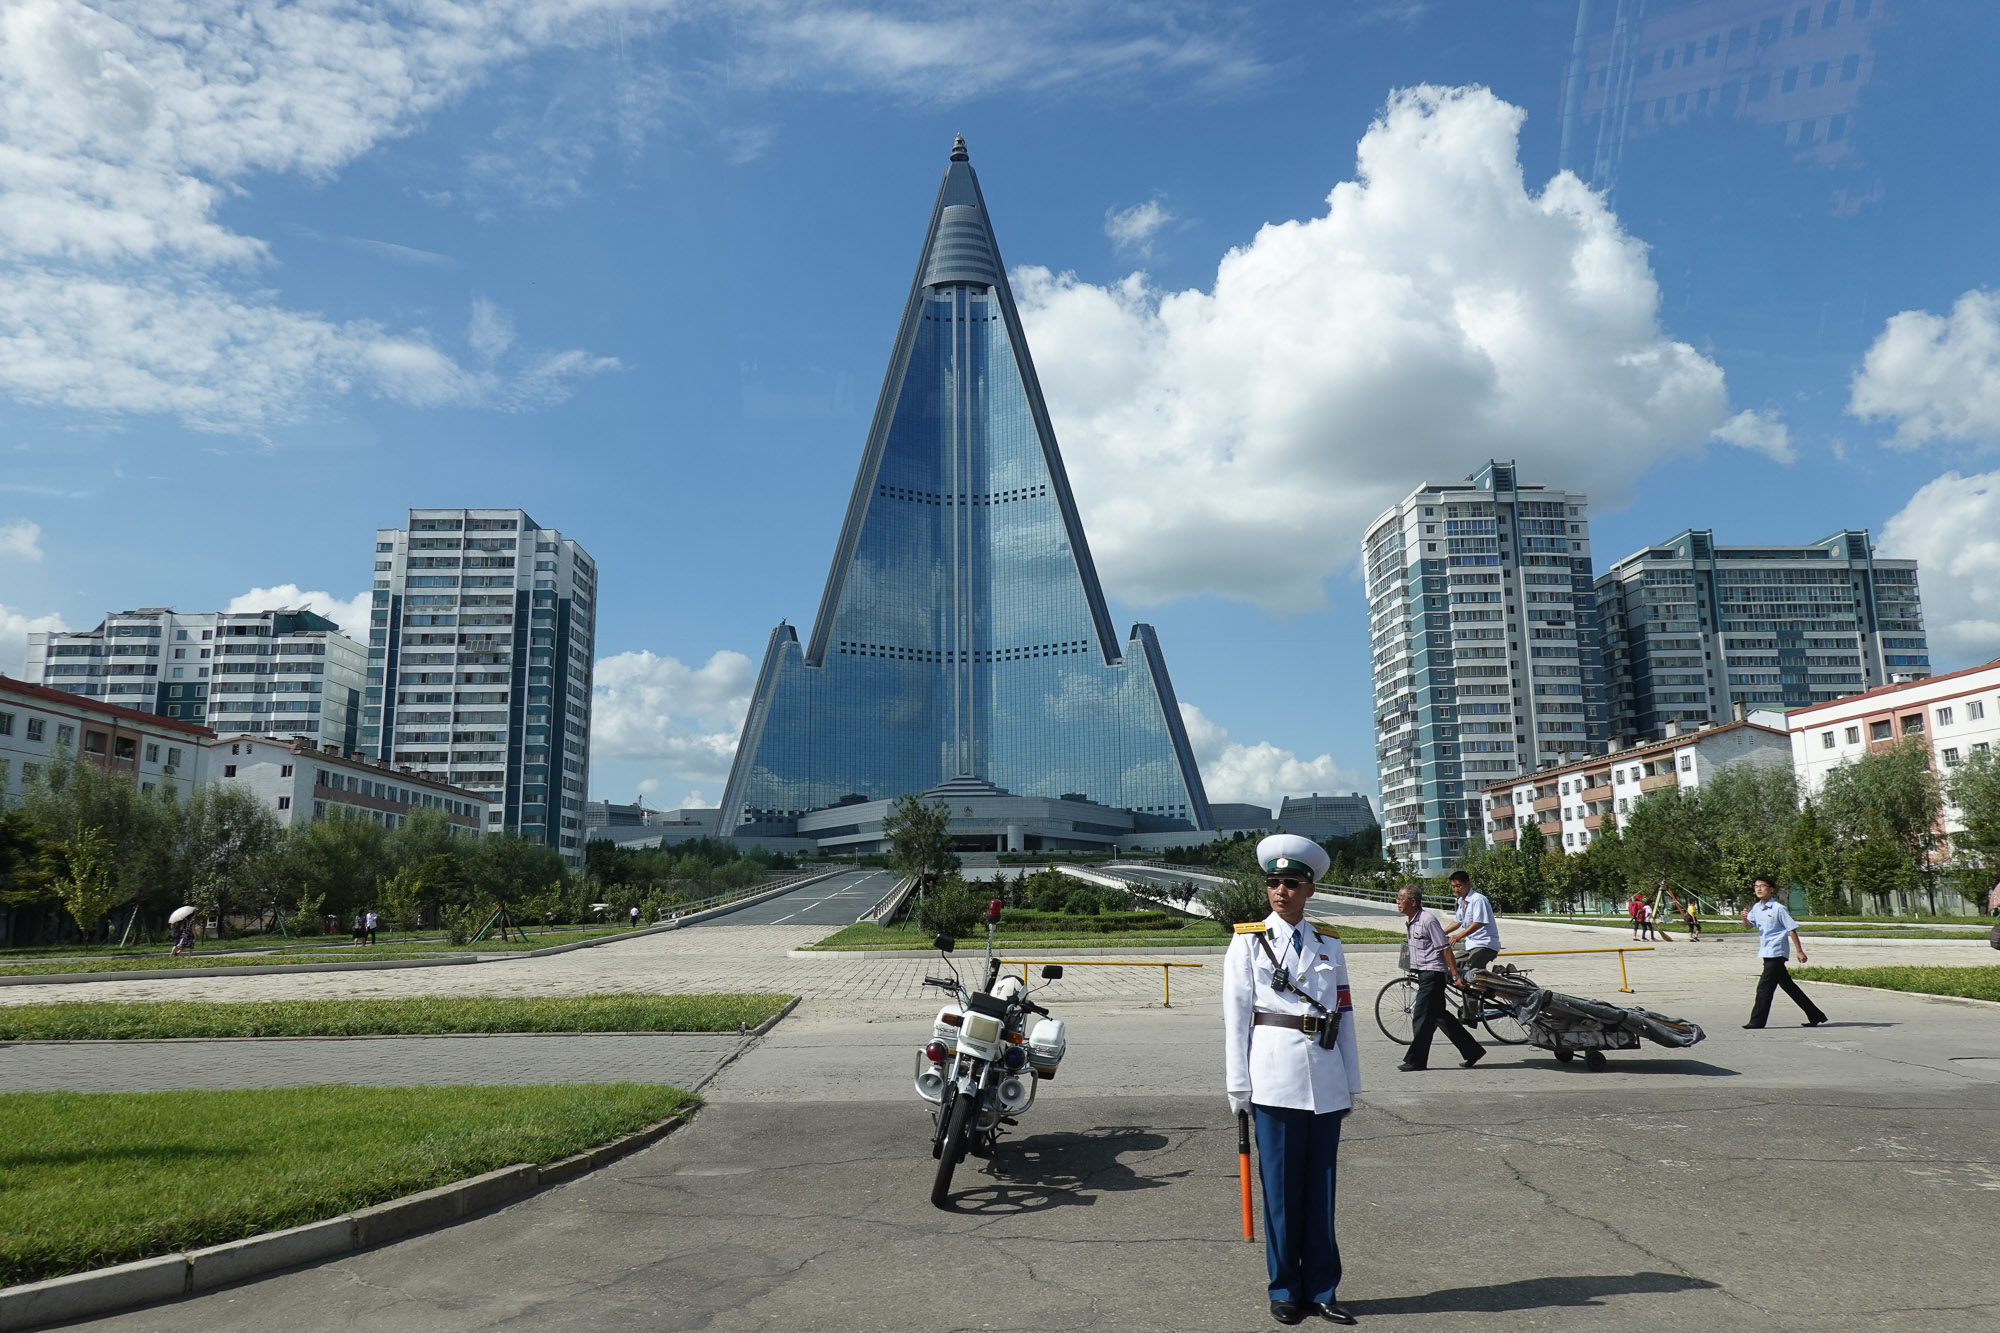 Ryugyong Hotel - North Koreaâ€™s Tallest Building | Uri Tours